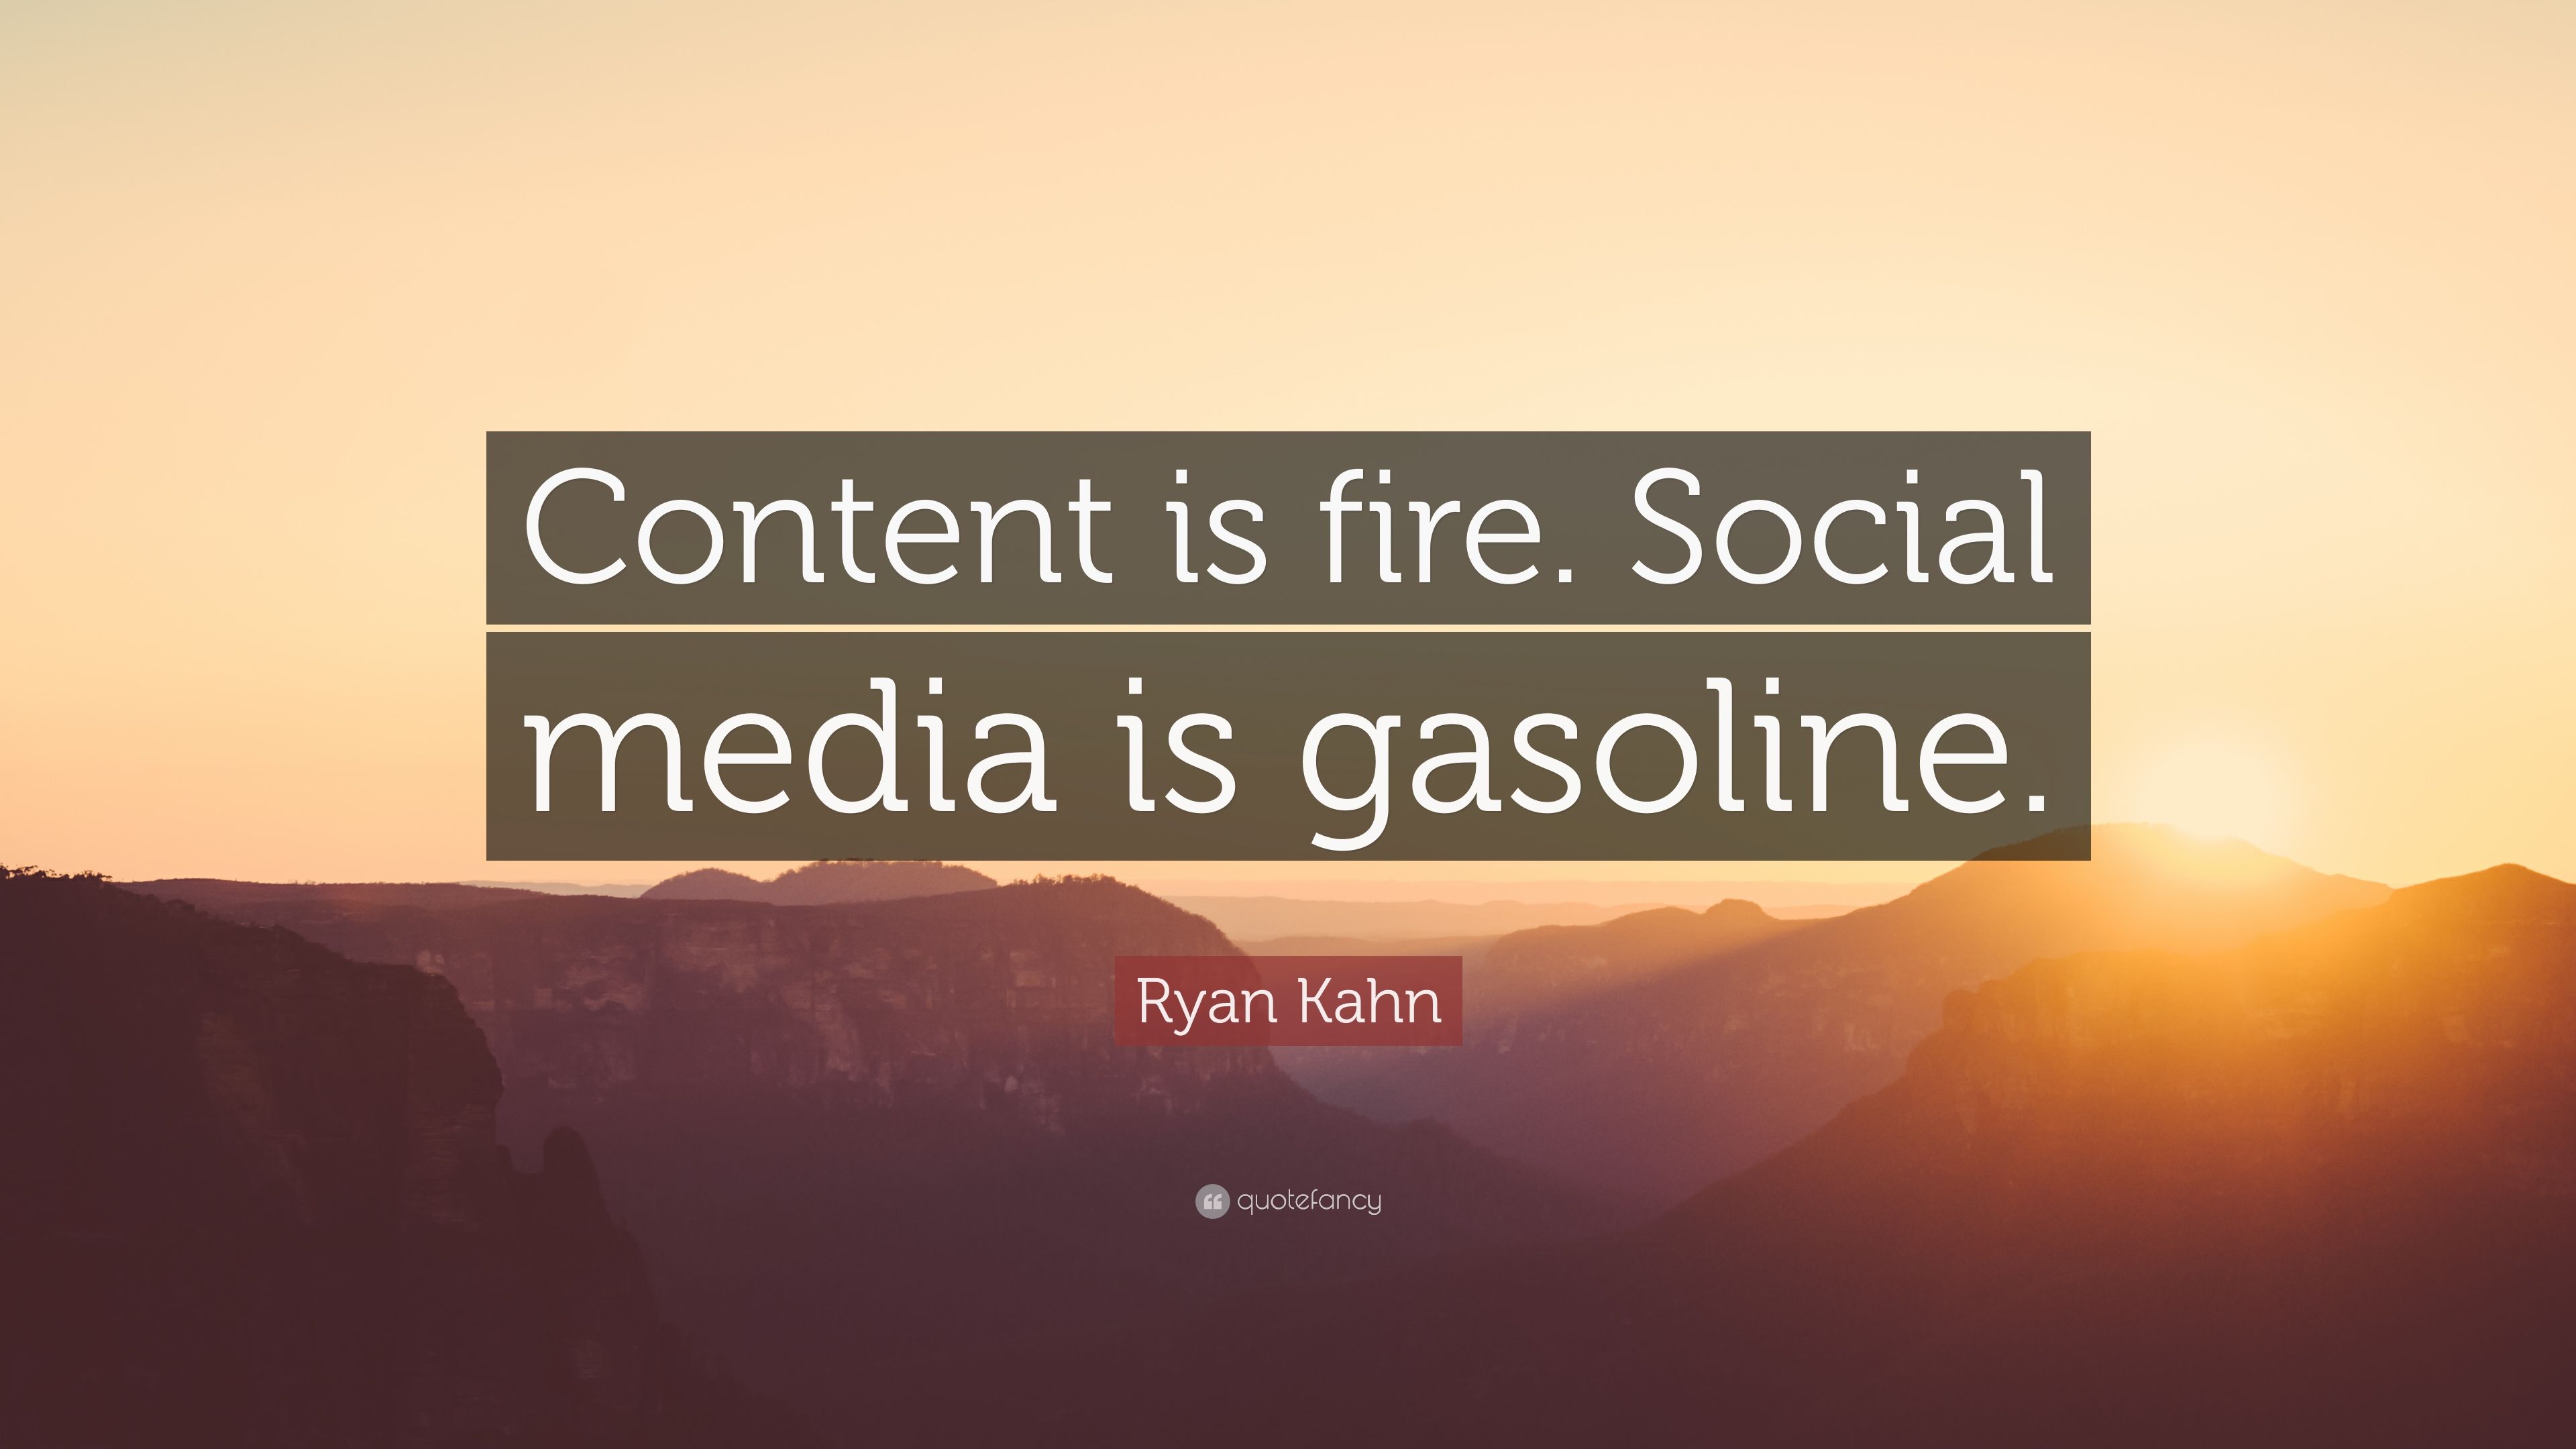 Ryan Kahn Quote: “Content is fire. Social media is gasoline.” 12